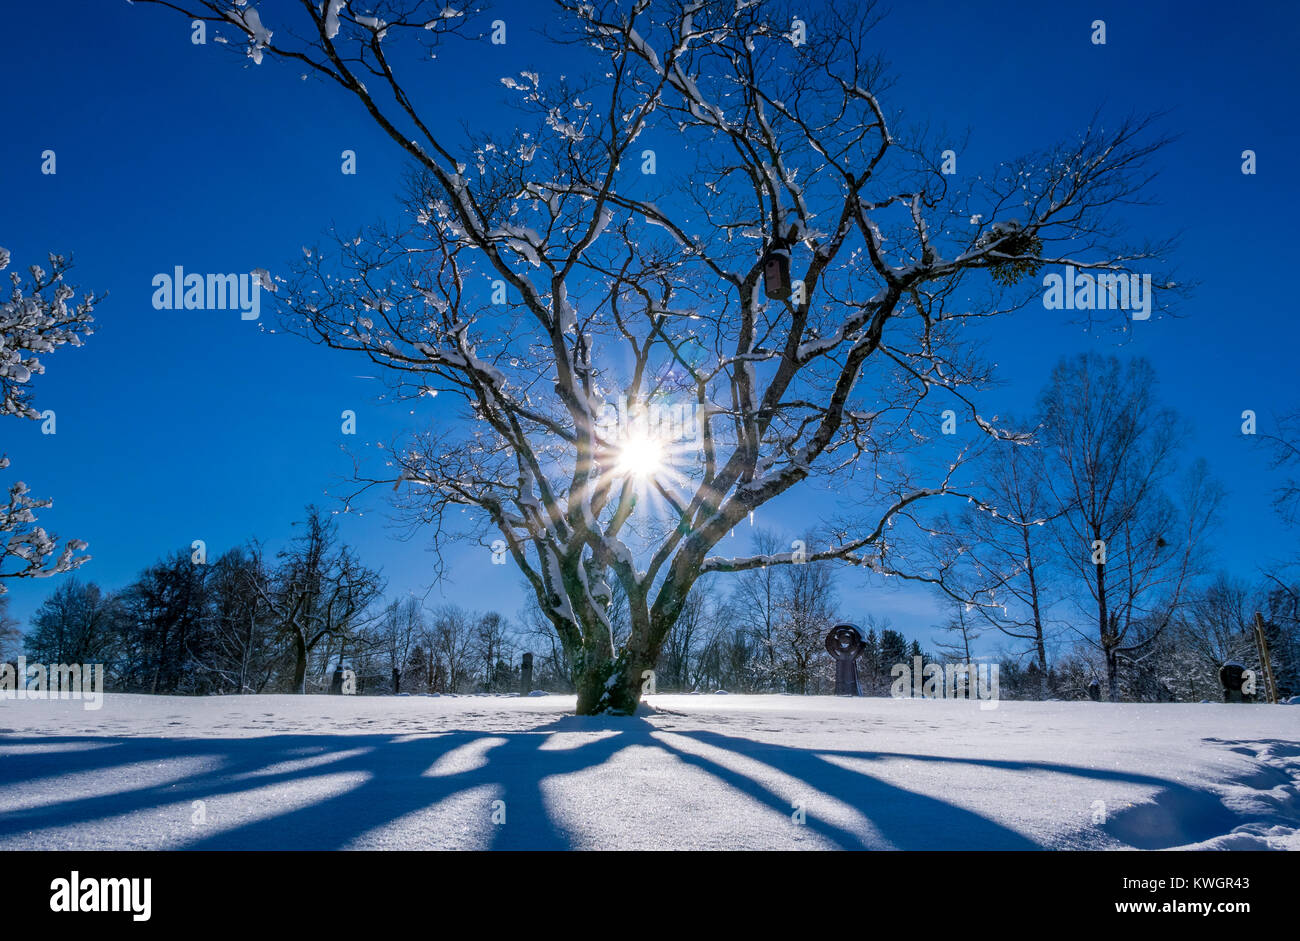 Snow covered landscape in winter, Bavaria, Germany, Europe Stock Photo